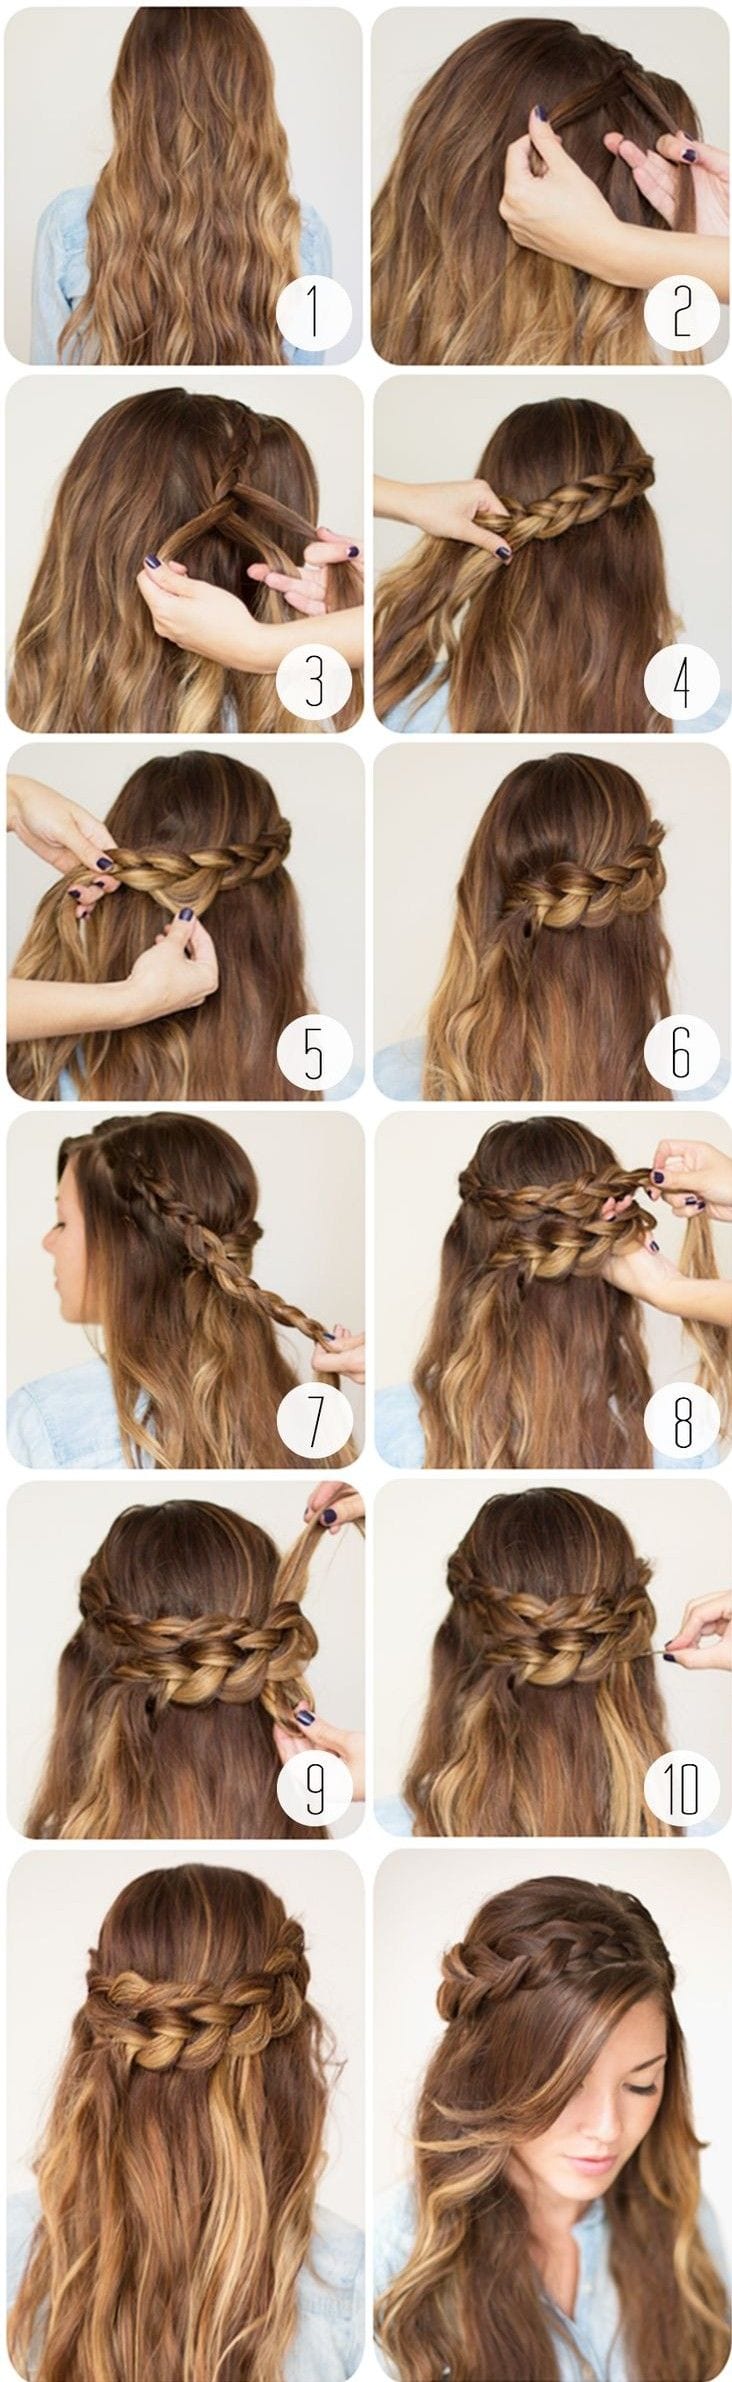 21 Super Easy Updos for Beginners | Easy bun, Low buns and Updos | Shoulder  hair, Hair styles, Long hair styles